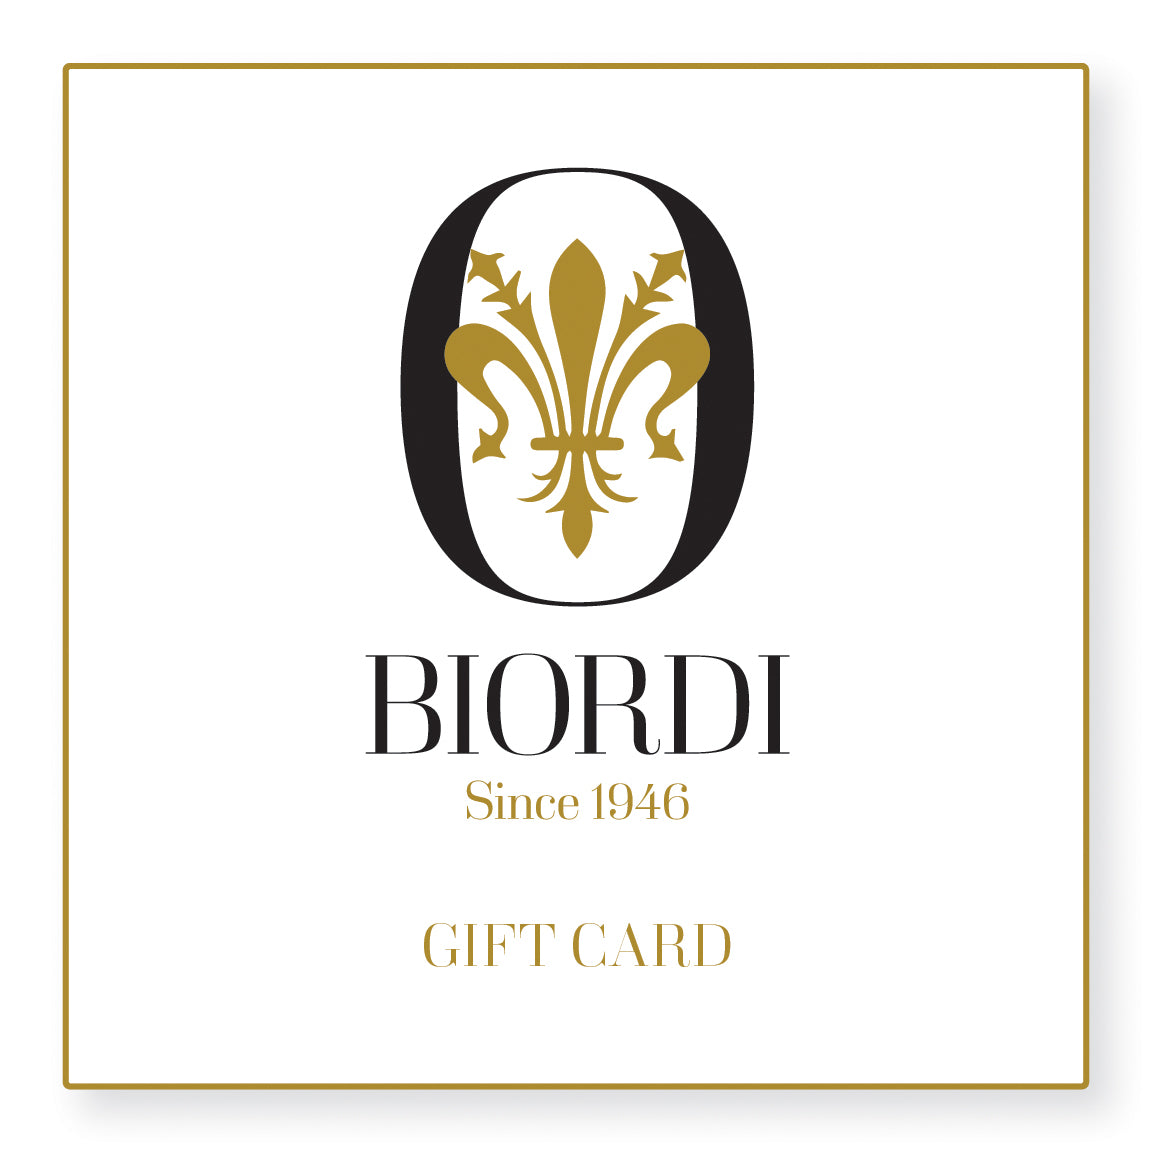 Biordi Gift eCard, ceramics, pottery, italian design, majolica, handmade, handcrafted, handpainted, home decor, kitchen art, home goods, deruta, majolica, Artisan, treasures, traditional art, modern art, gift ideas, style, SF, shop small business, artists, shop online, landmark store, legacy, one of a kind, limited edition, gift guide, gift shop, retail shop, decorations, shopping, italy, home staging, home decorating, home interiors